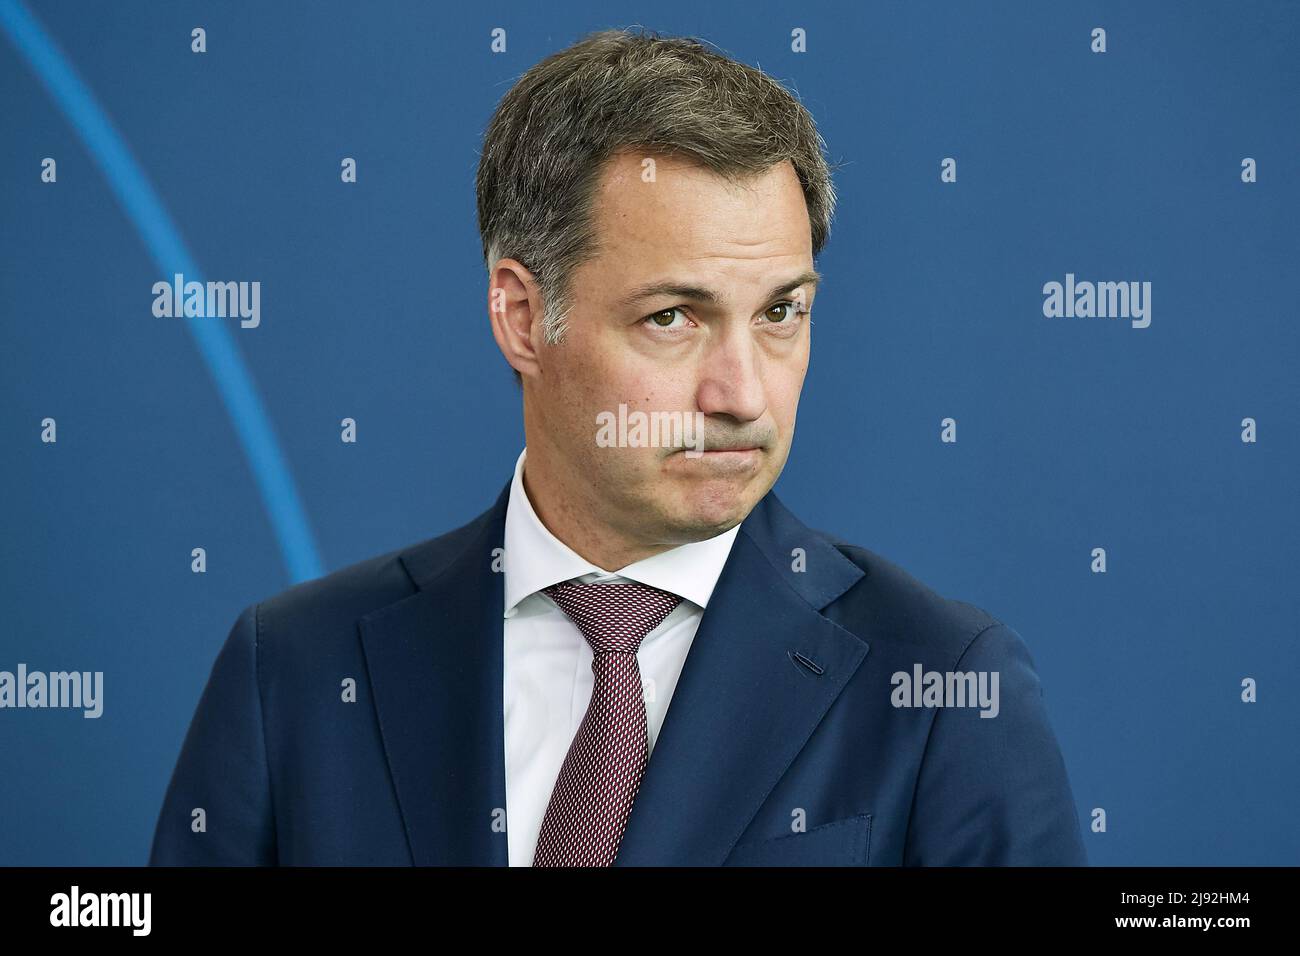 10.05.2022, Berlin, Berlin, Germany - Alexander De Croo, Prime Minister of the Kingdom of Belgium, during a press conference at the Chancellor's Offic Stock Photo